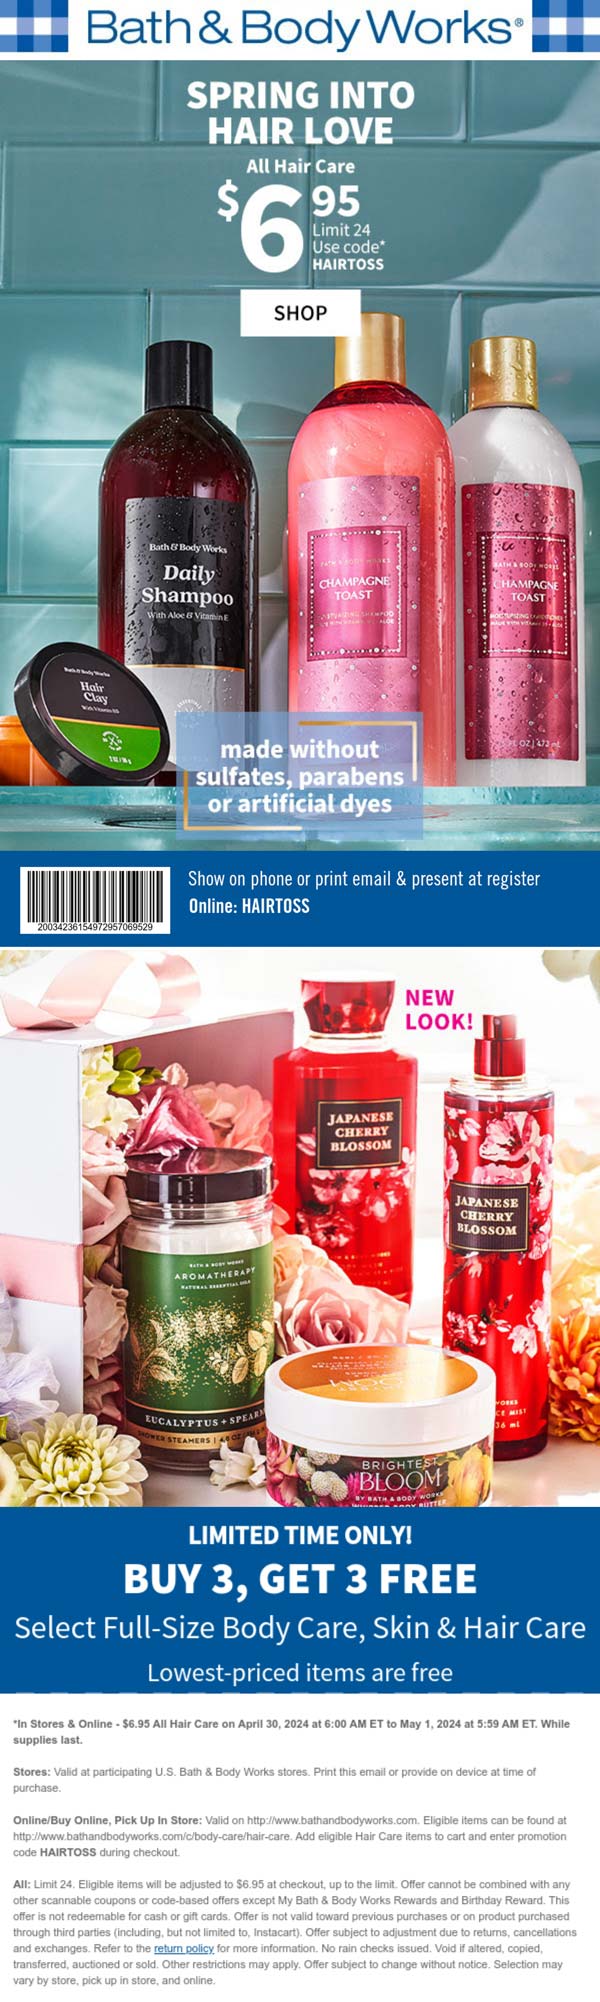 Bath & Body Works stores Coupon  $7 hair care & 6-for-3 body care today at Bath & Body Works, or online via promo code HAIRTOSS #bathbodyworks 